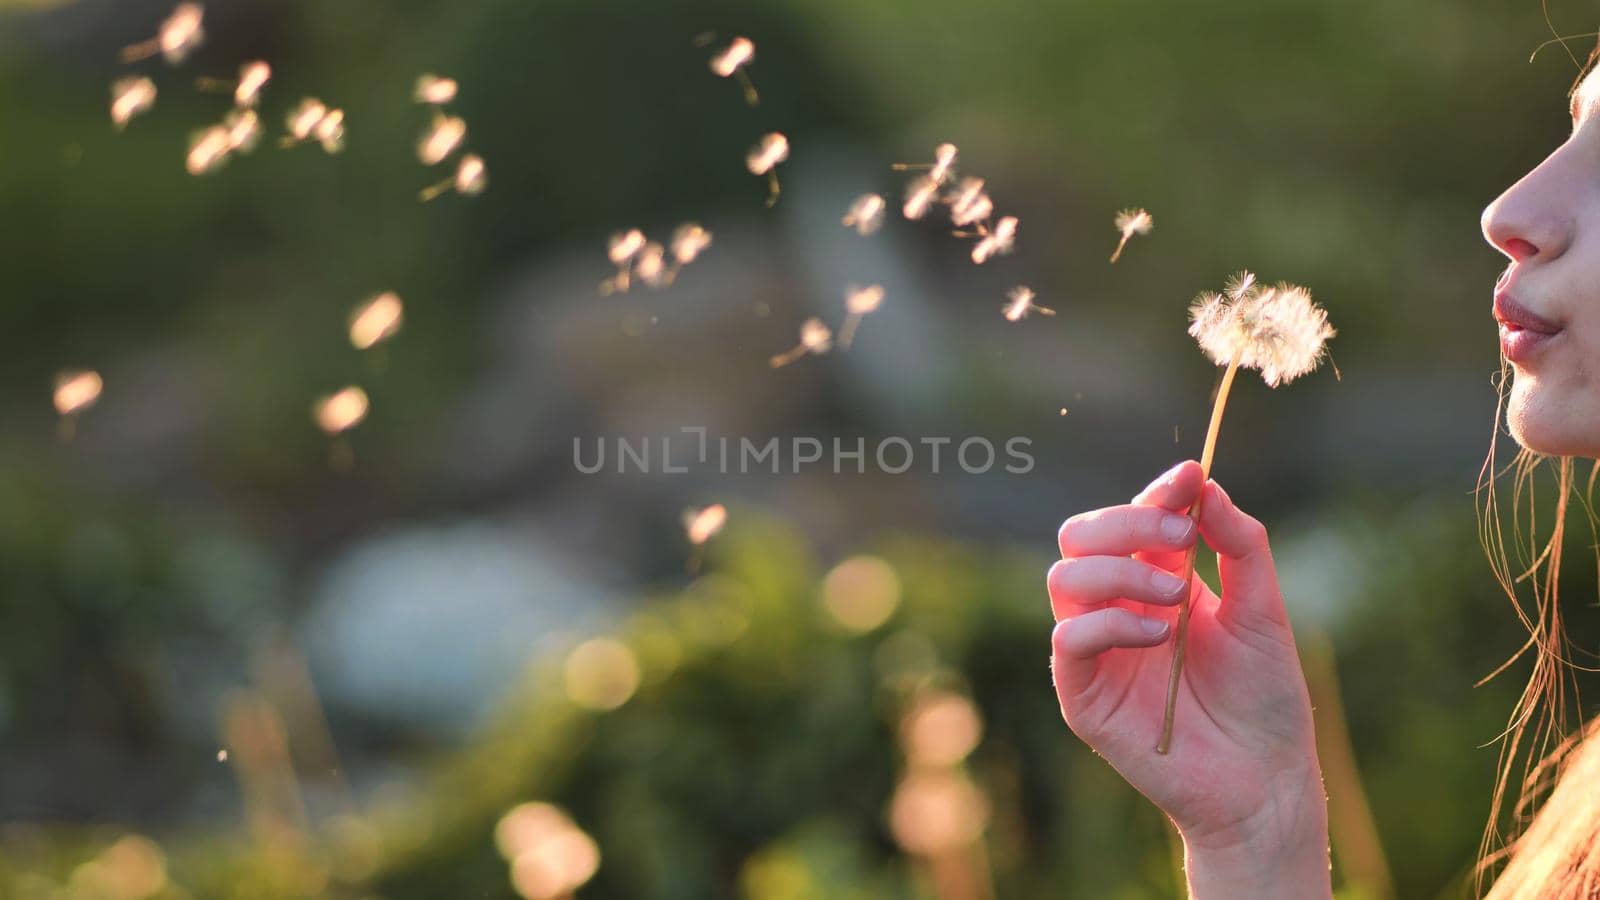 A young girl gently looks at the dandelion flower and blows it away